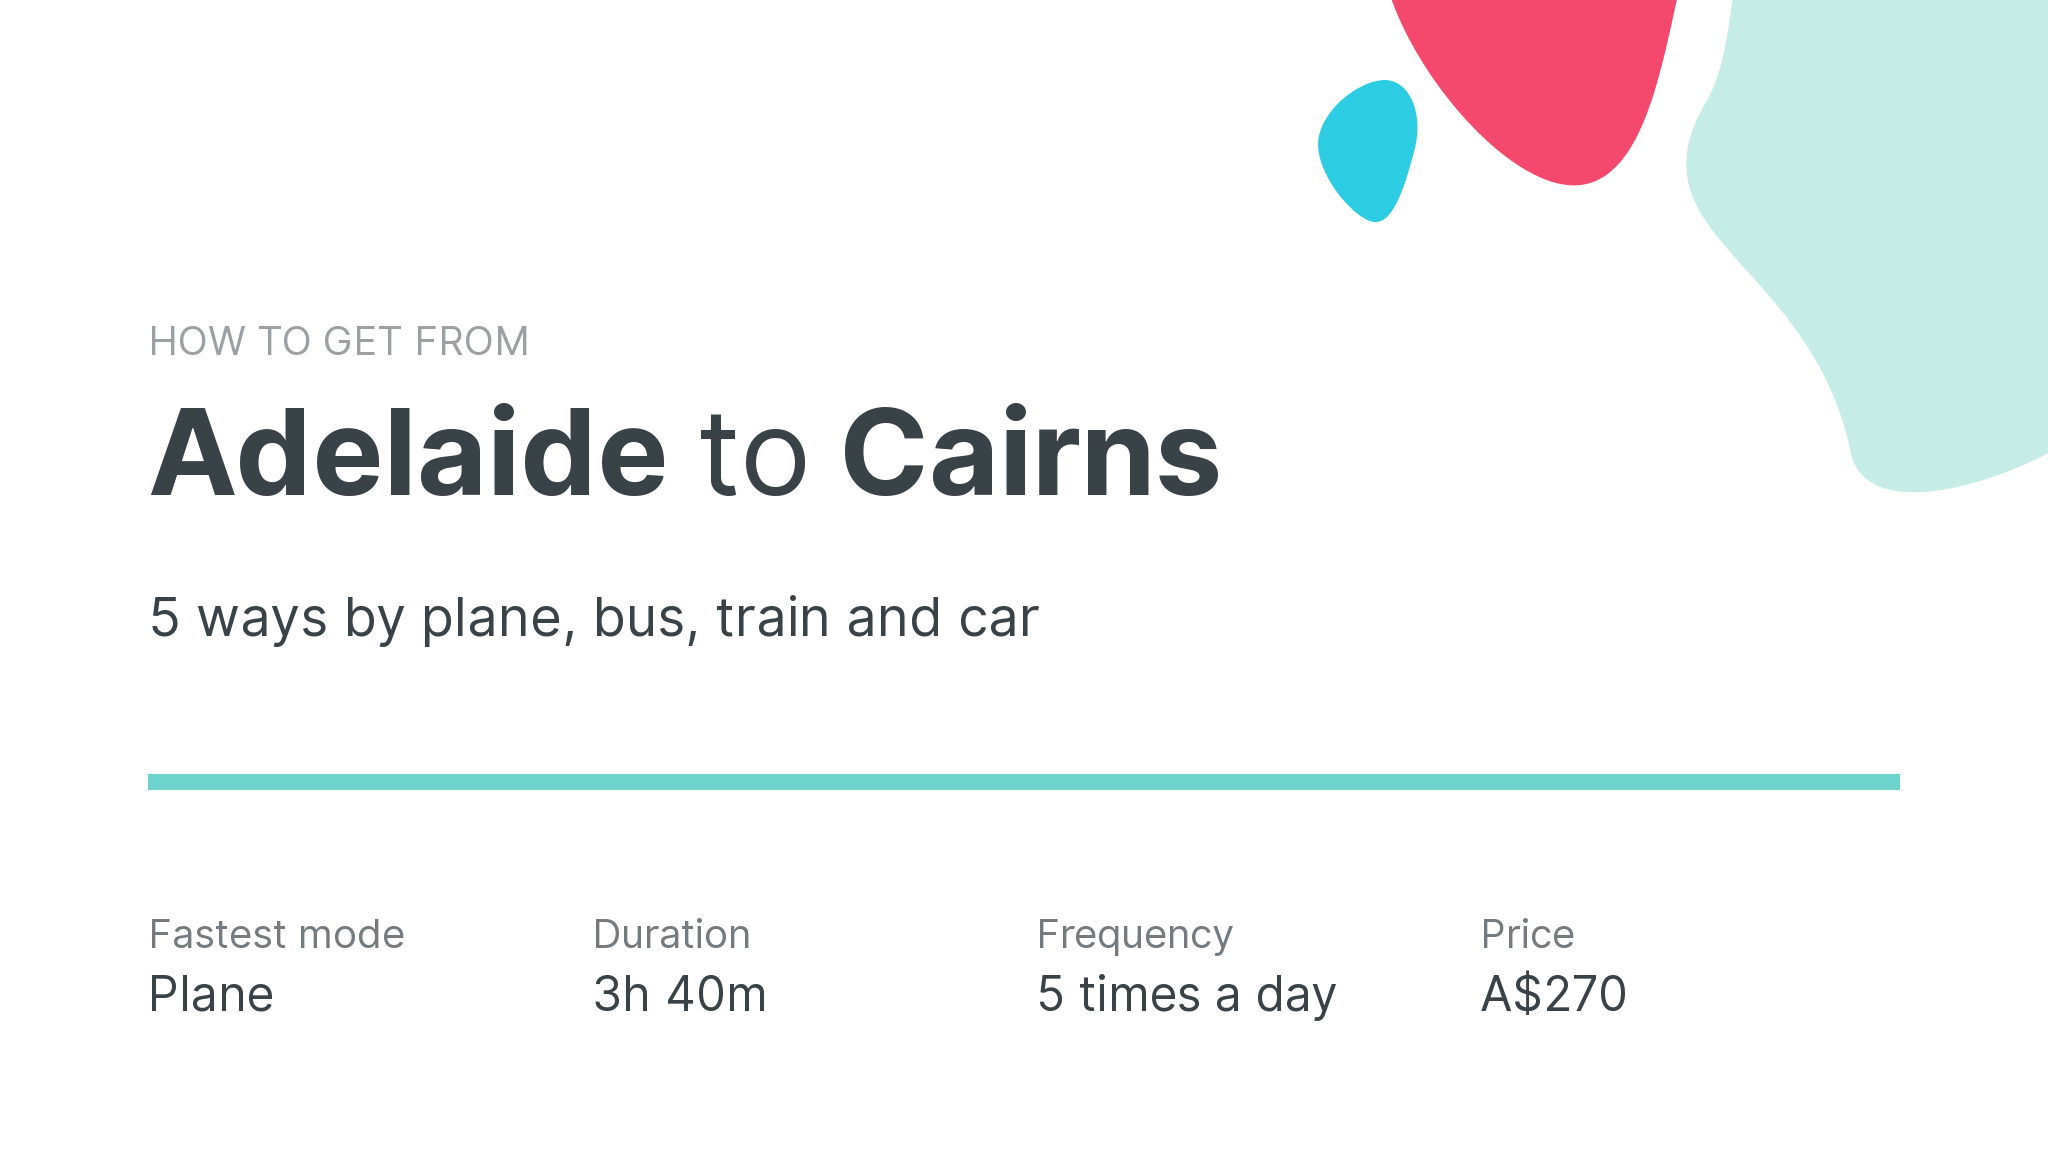 How do I get from Adelaide to Cairns